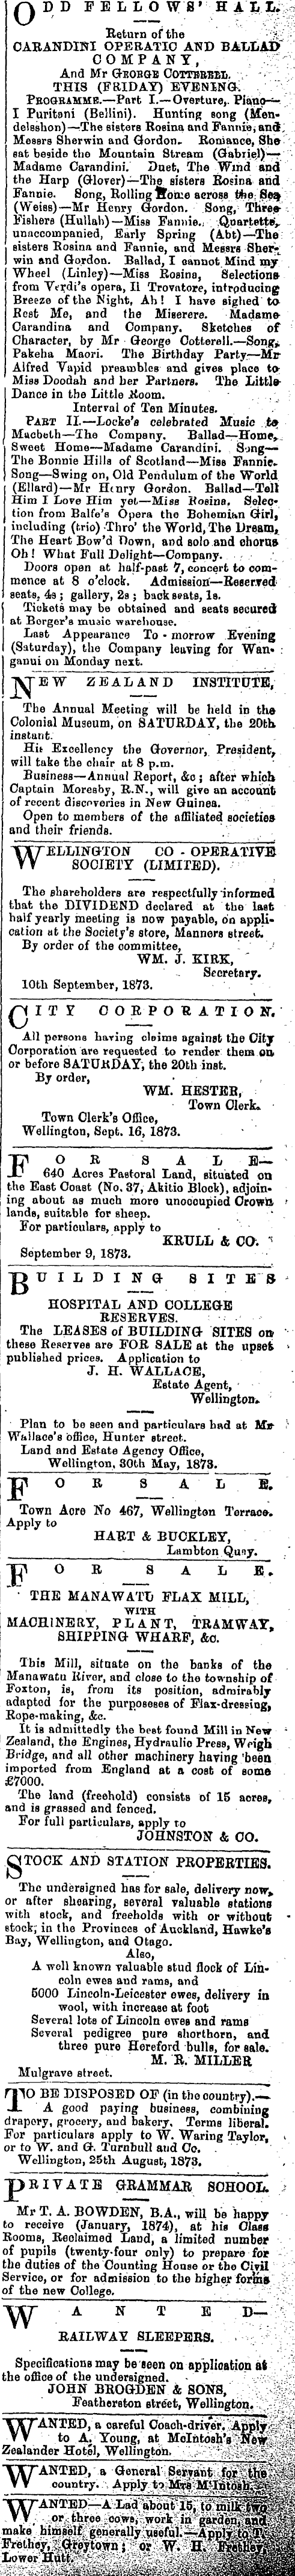 Papers Past Newspapers Wellington Independent 19 September 1873 Page 3 Advertisements Column 4